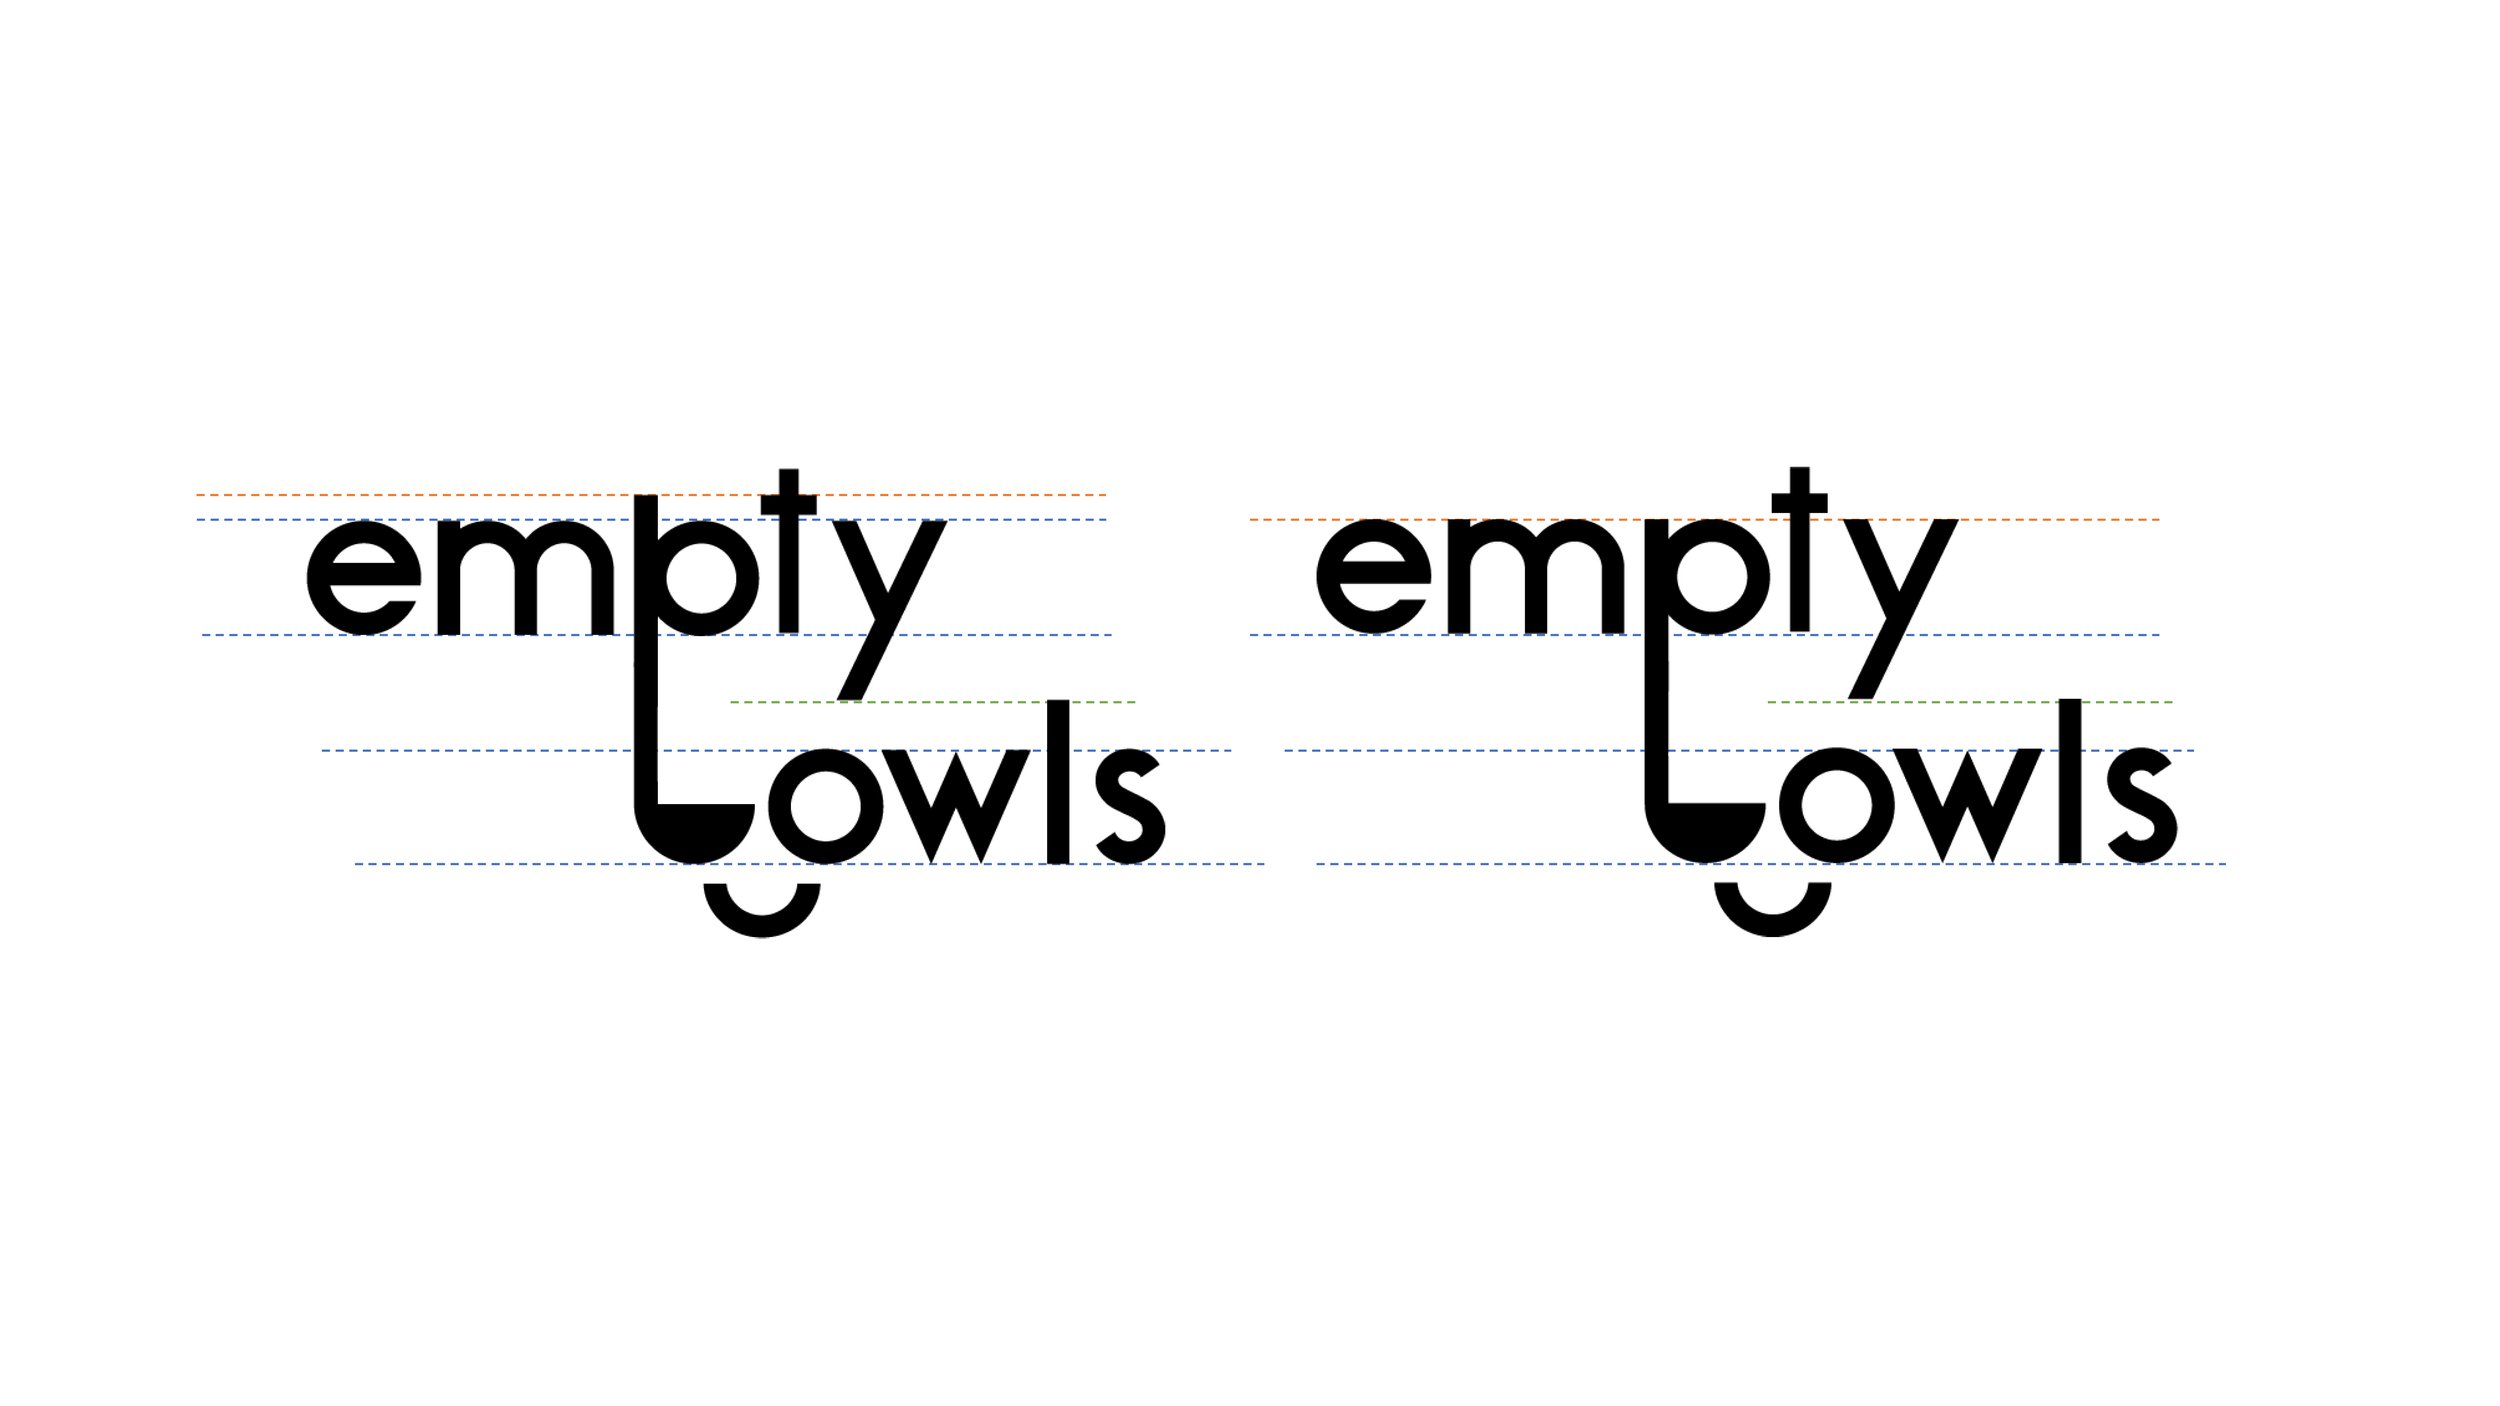 Refined Empty Bowls Logos_Page_2.jpg